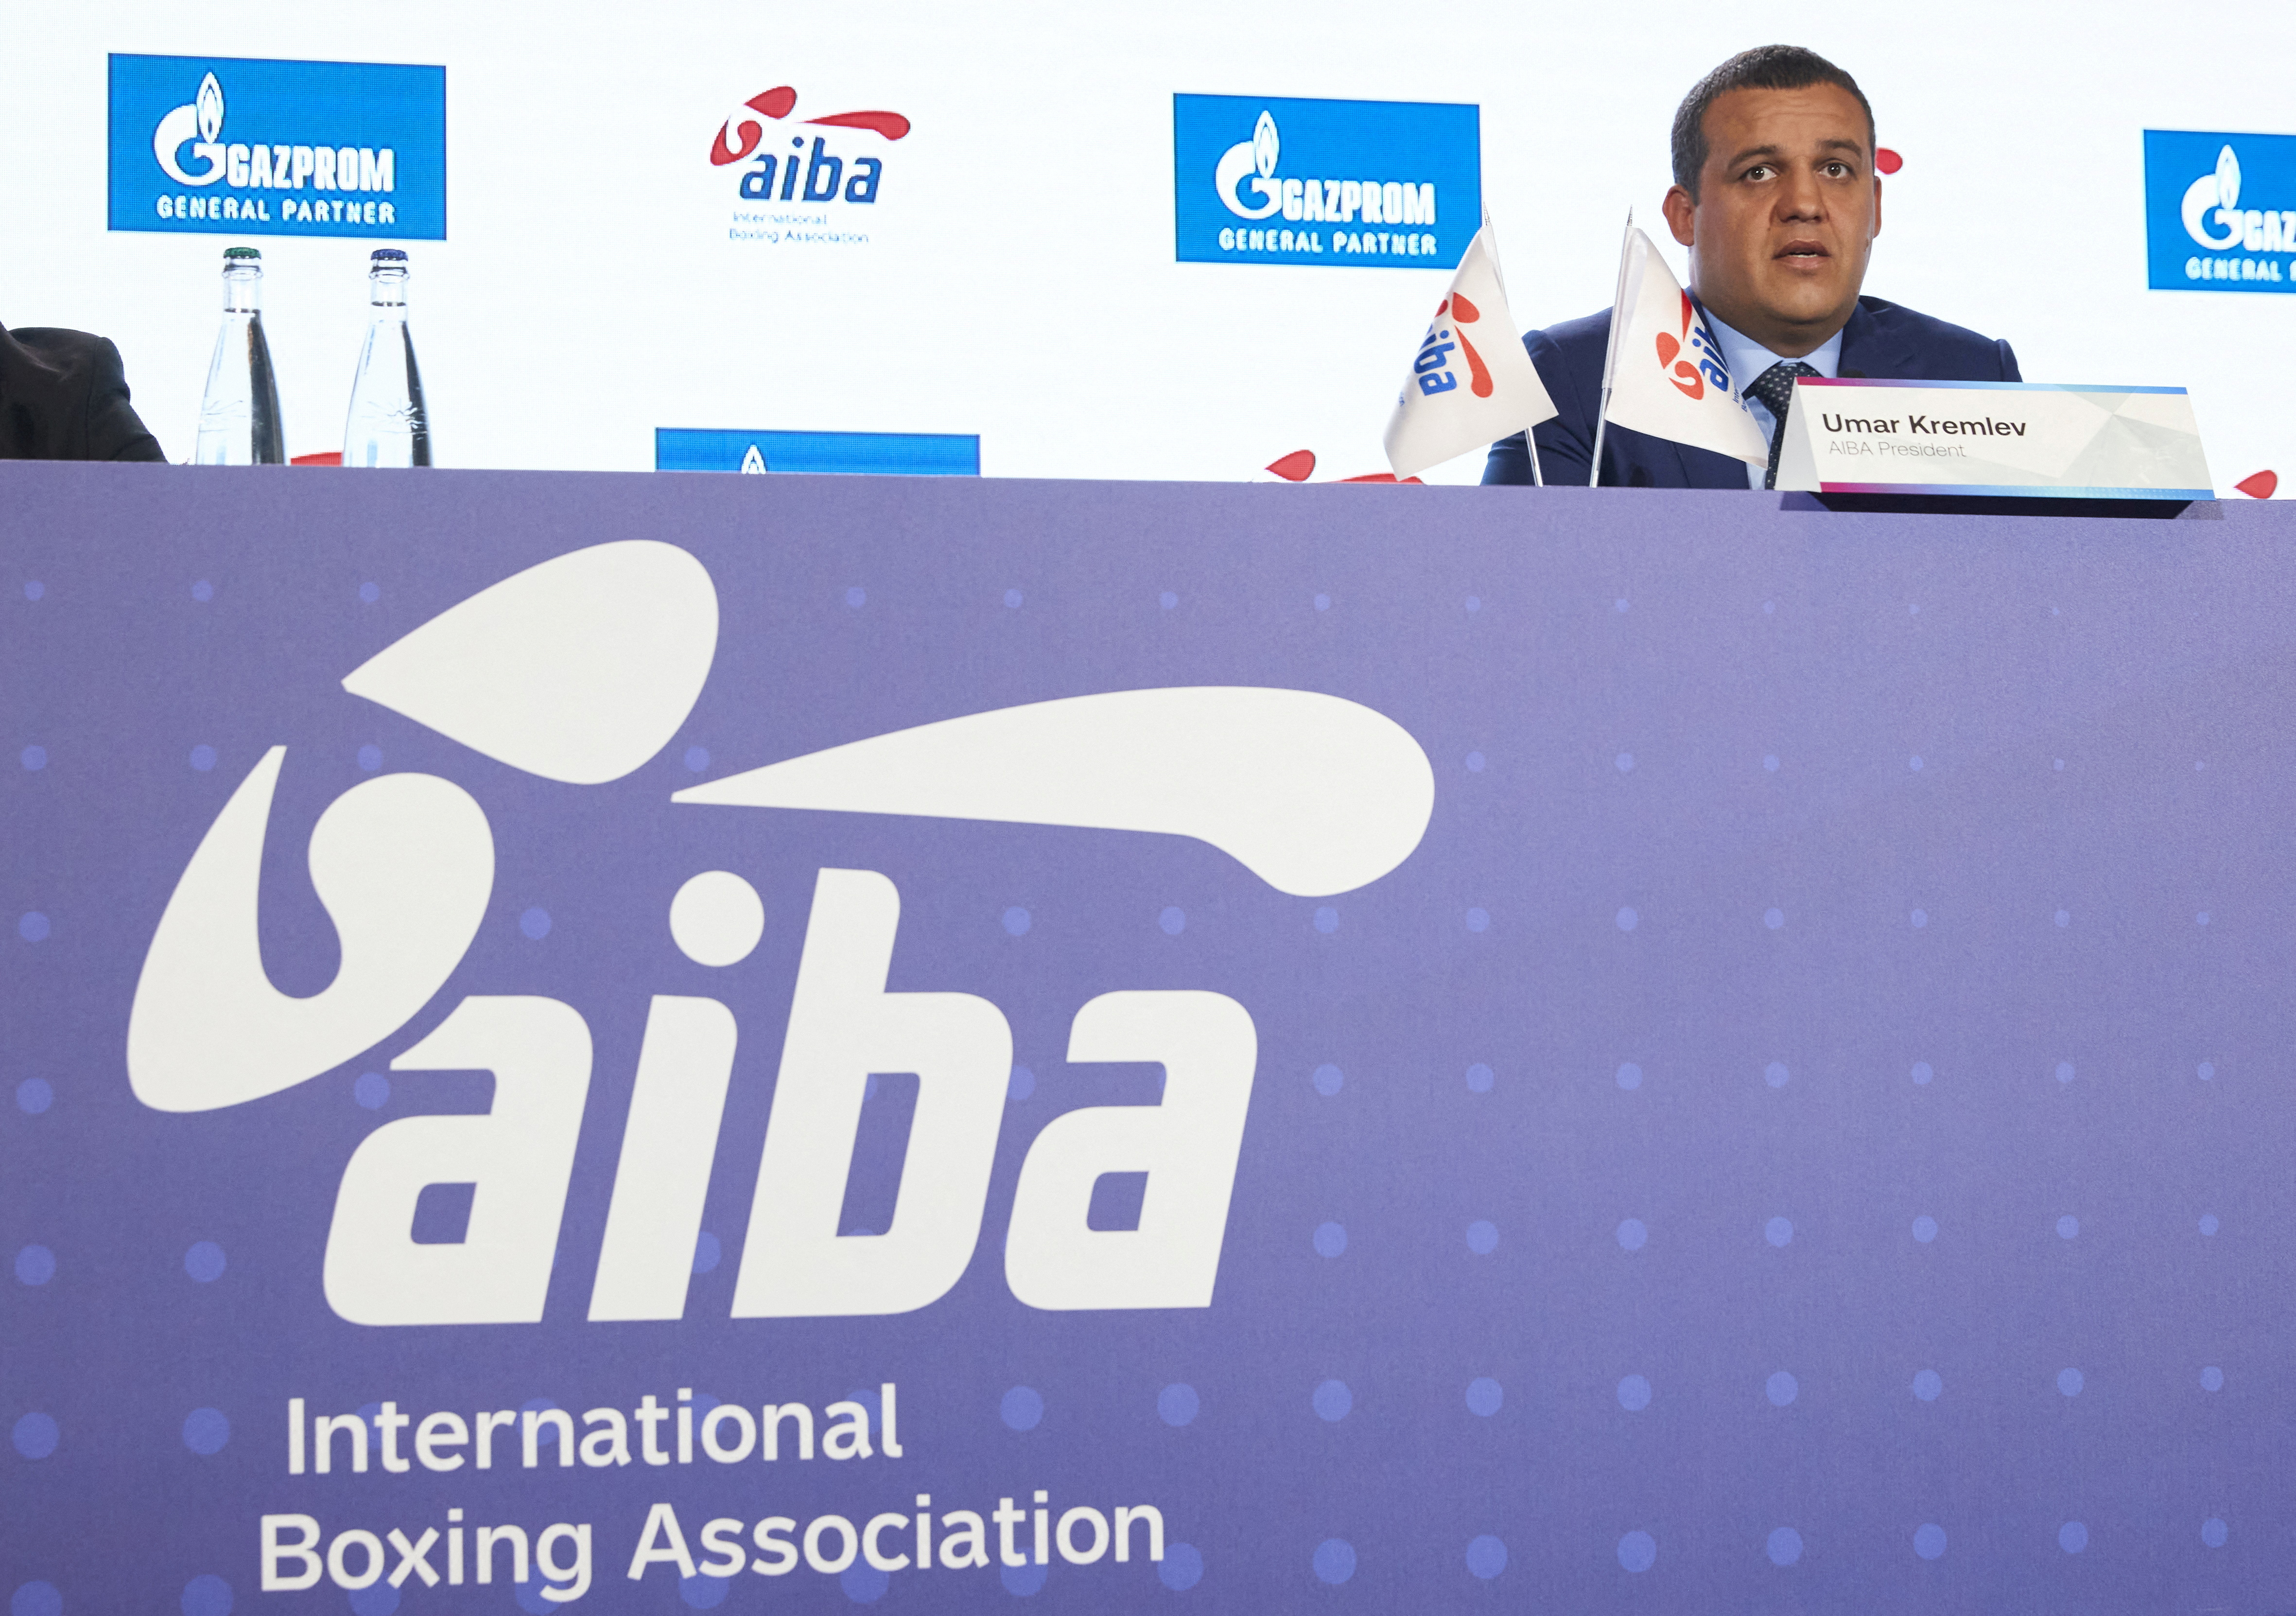 AIBA President Kremlev attends a news conference ahead of the Tokyo 2020 Olympic Games in Lausanne